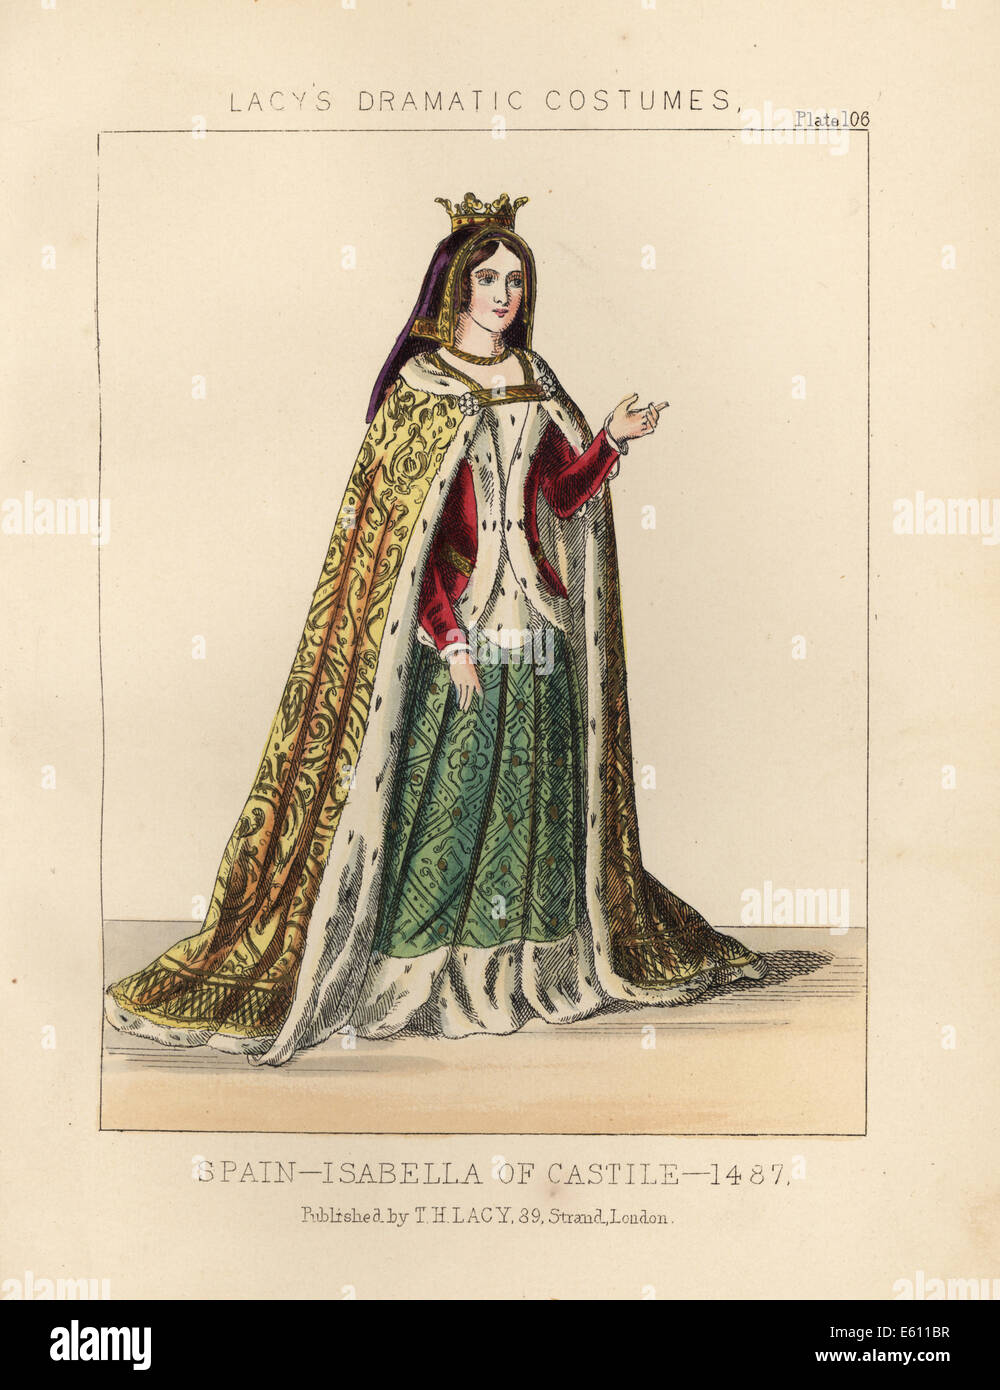 Isabella of Castile, Spain, 1487. Stock Photo